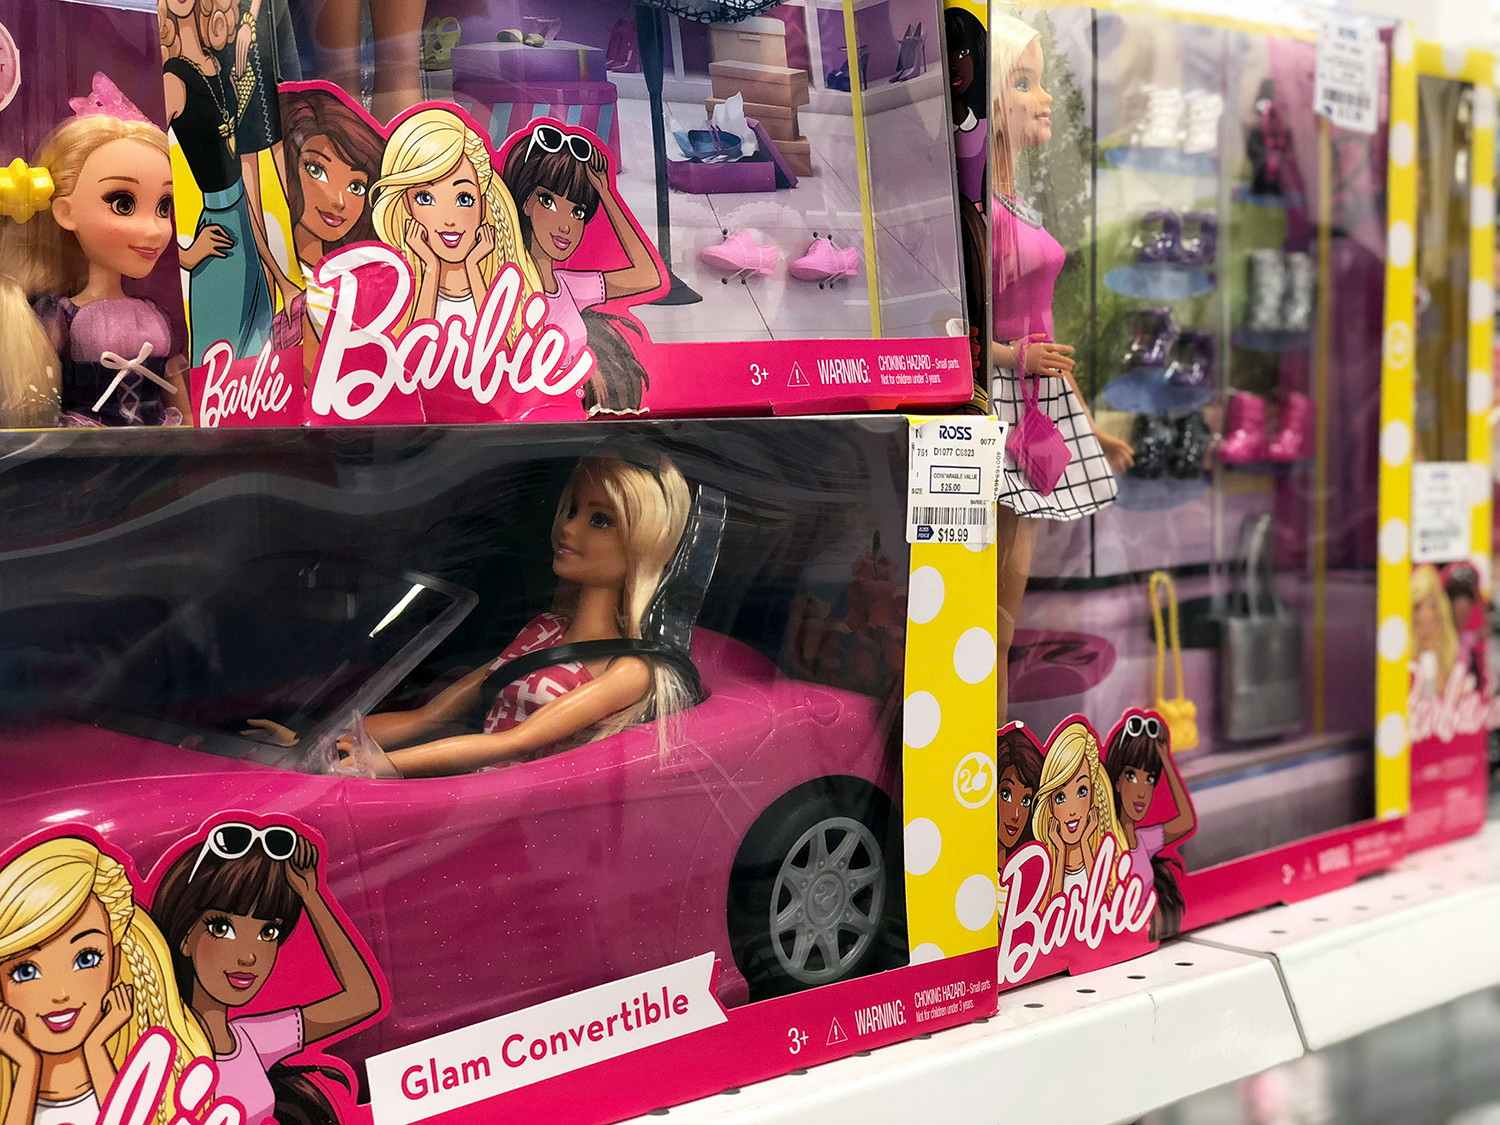 Barbie sets for under $20 at Ross that cost over $30 on Amazon.